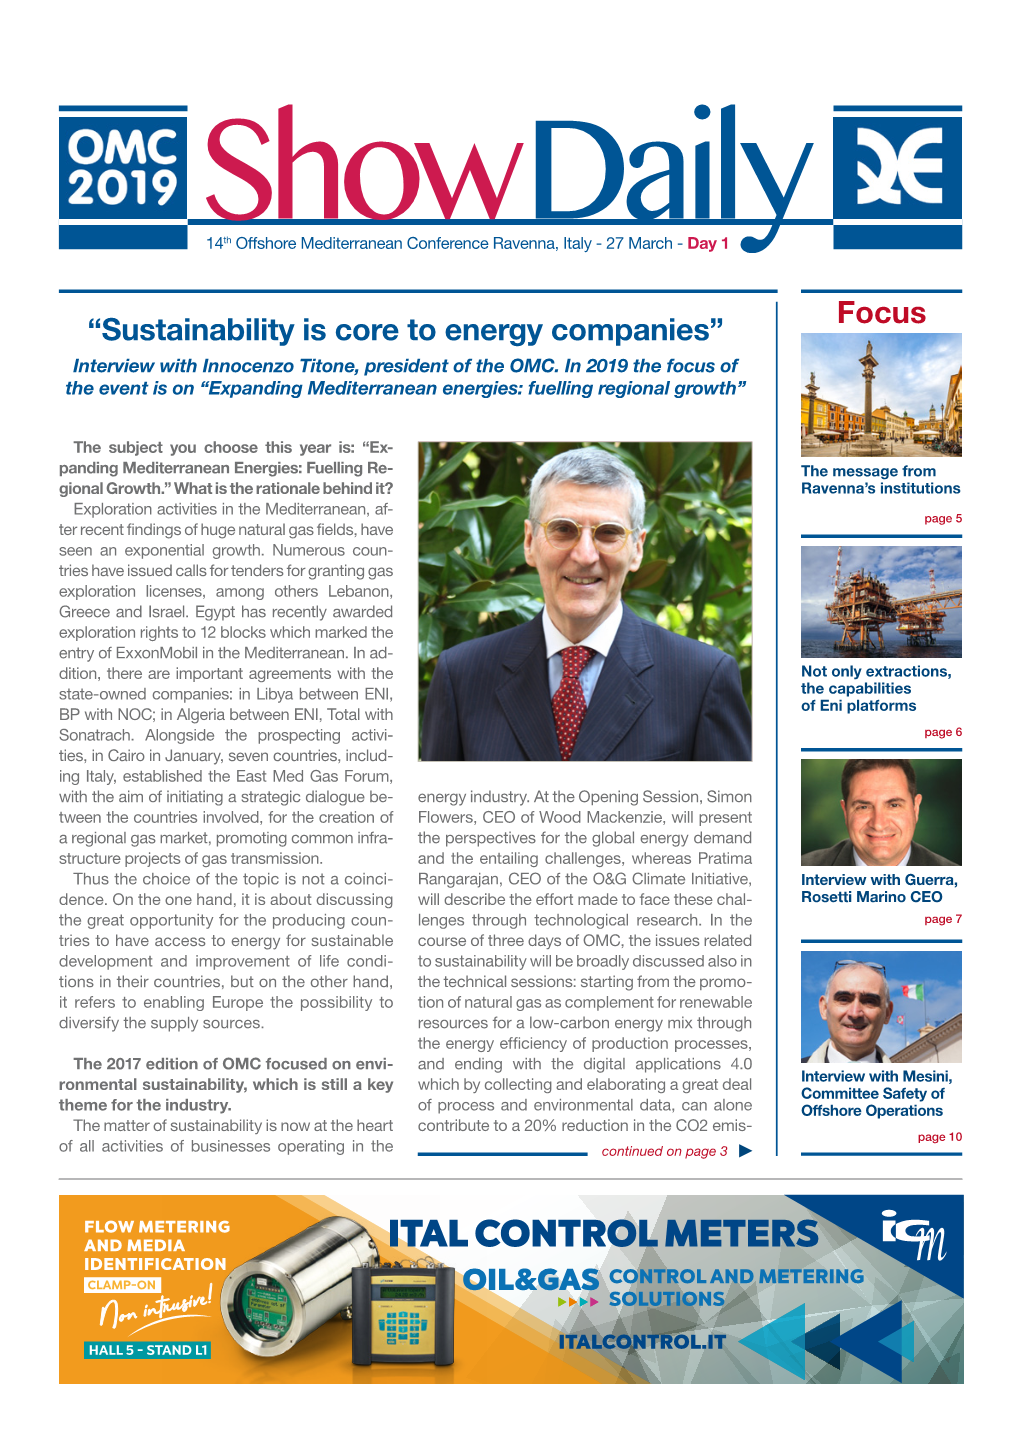 Focus “Sustainability Is Core to Energy Companies” Interview with Innocenzo Titone, President of the OMC